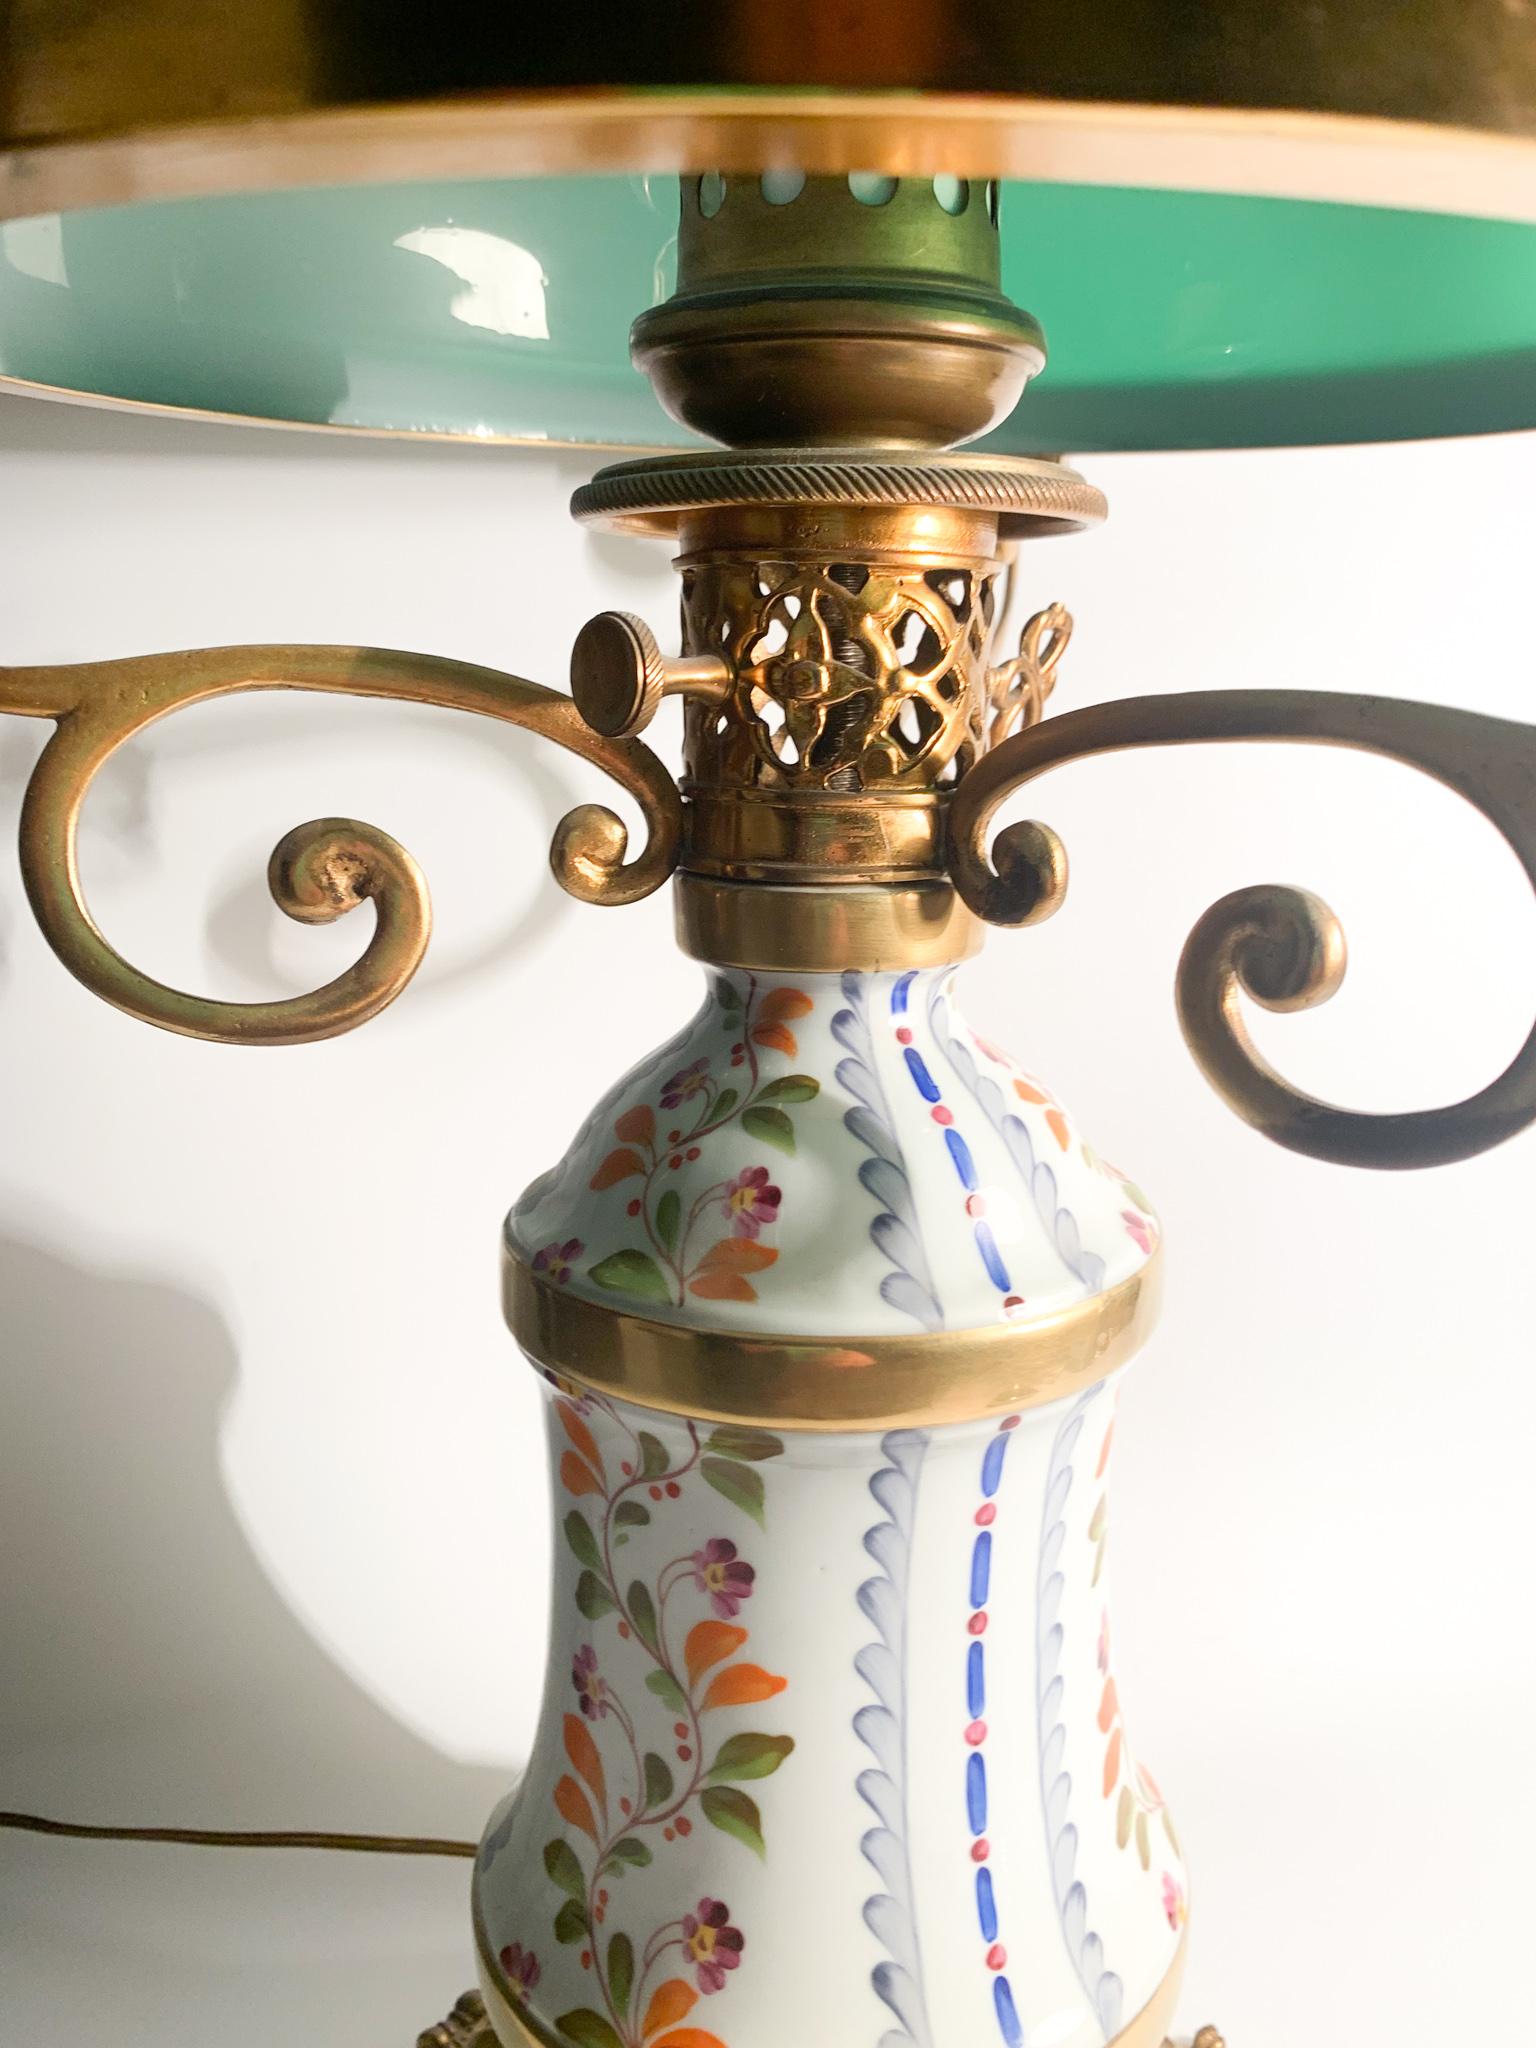 Hand painted Sevres porcelain table lamp, with bronze structure and green glass shade, made in the 1940s

Sèvres ceramics are one of the most famous ceramic manufacturers in all of Europe, born in France in the 18th century. From the beginning,